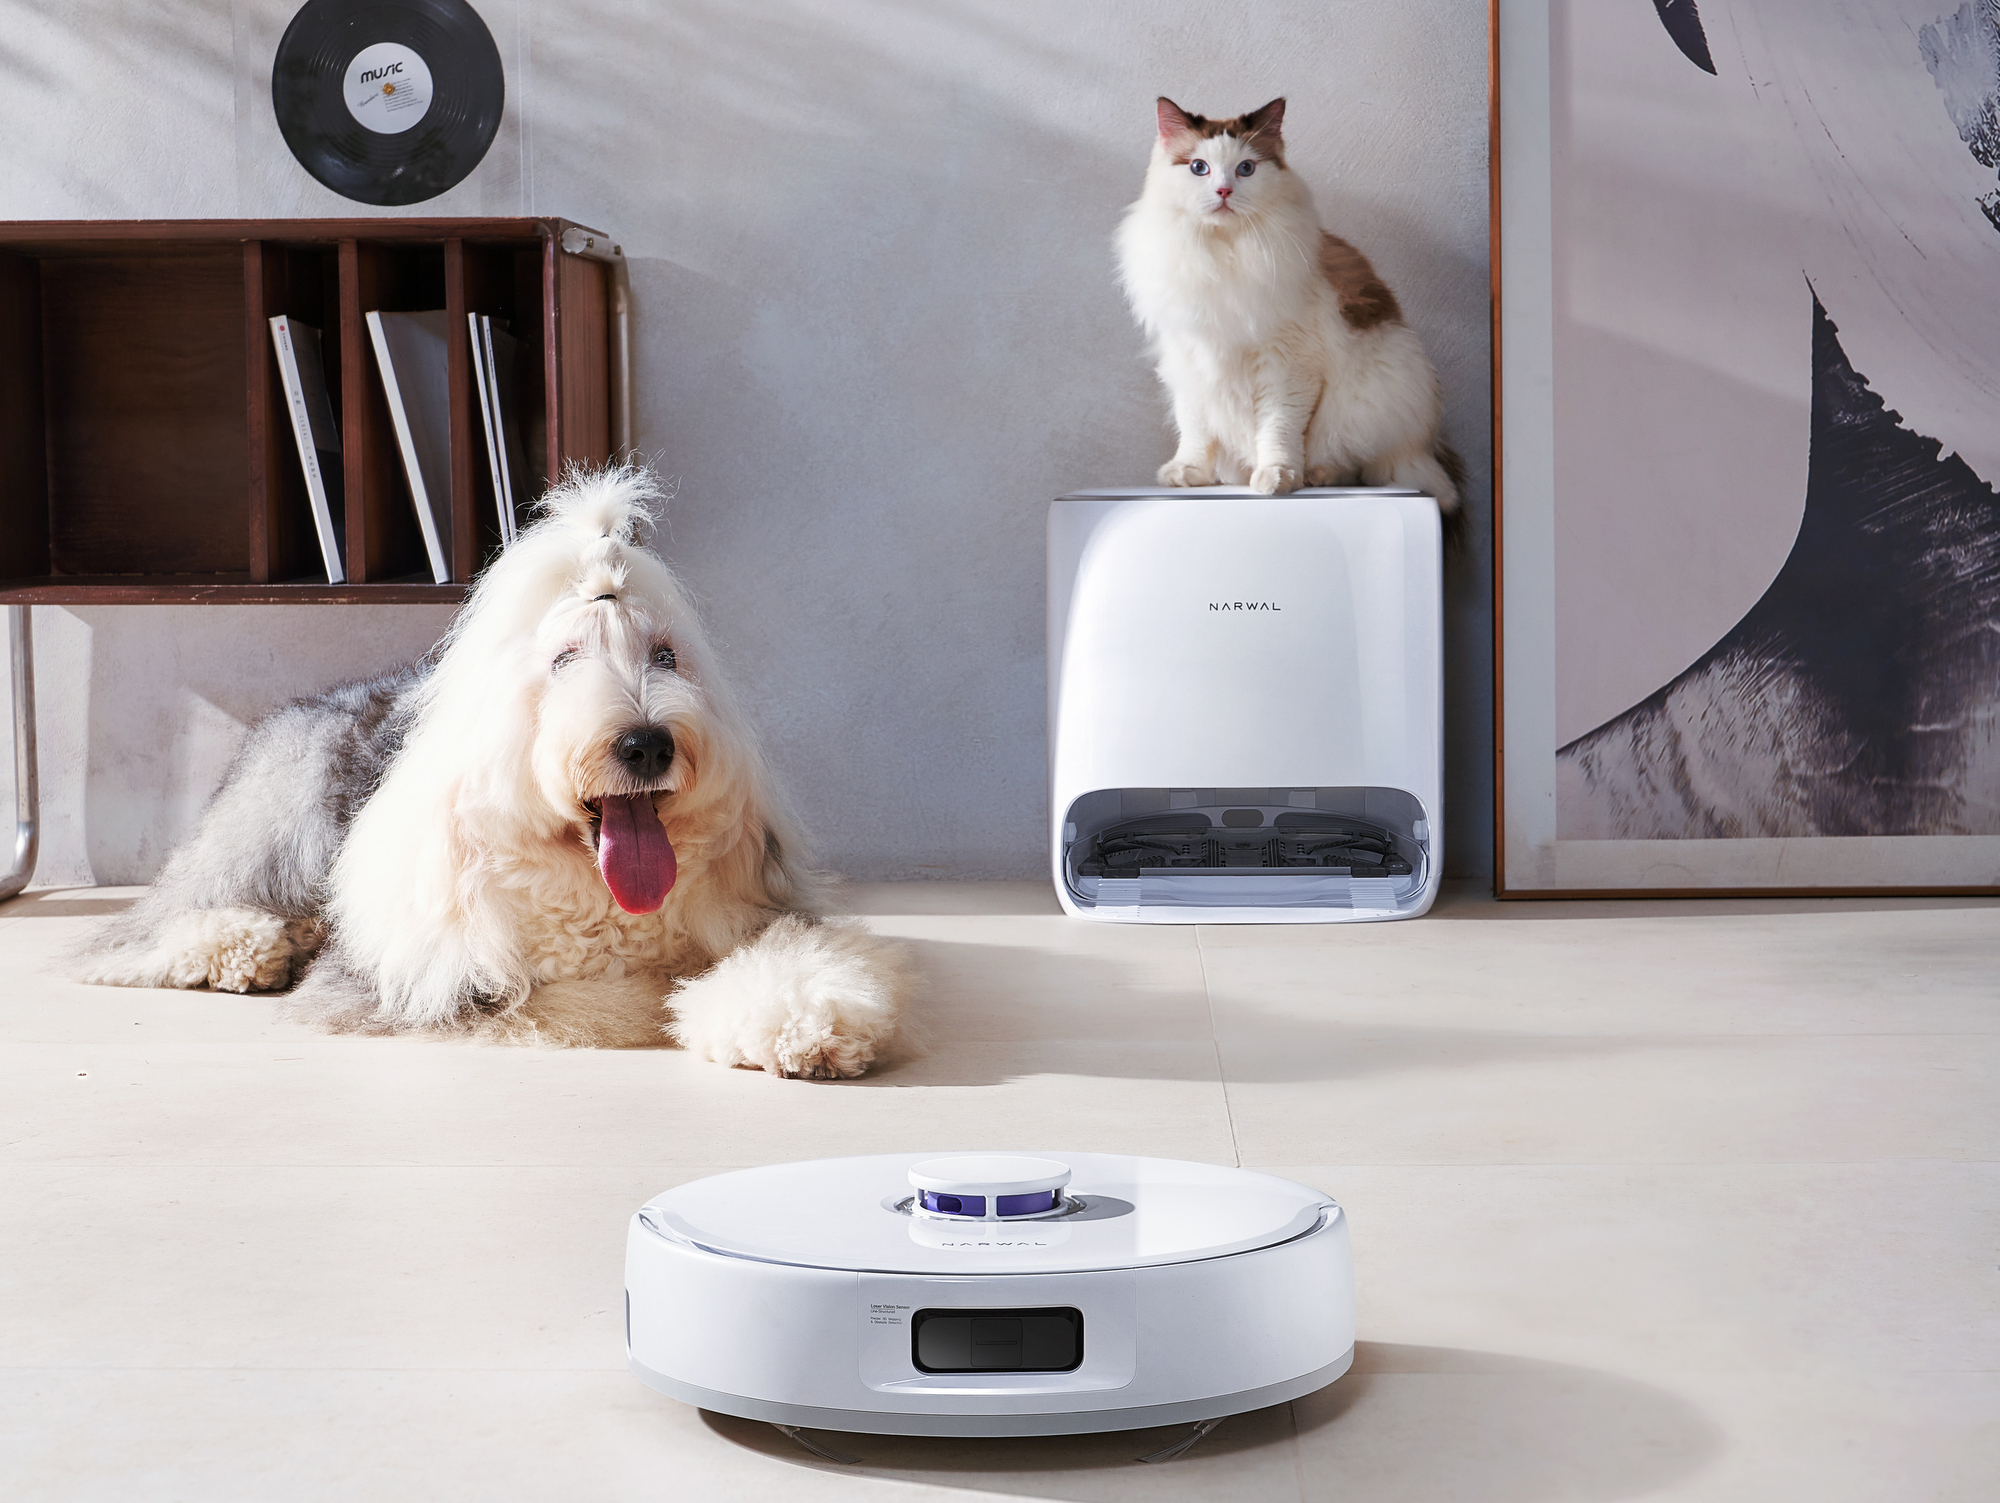  Narwal Mop Robot Vacuum with Self-Cleaning Station, LiDAR  Navigation, Carpet Detection - For Hard Floors and Pet Hair